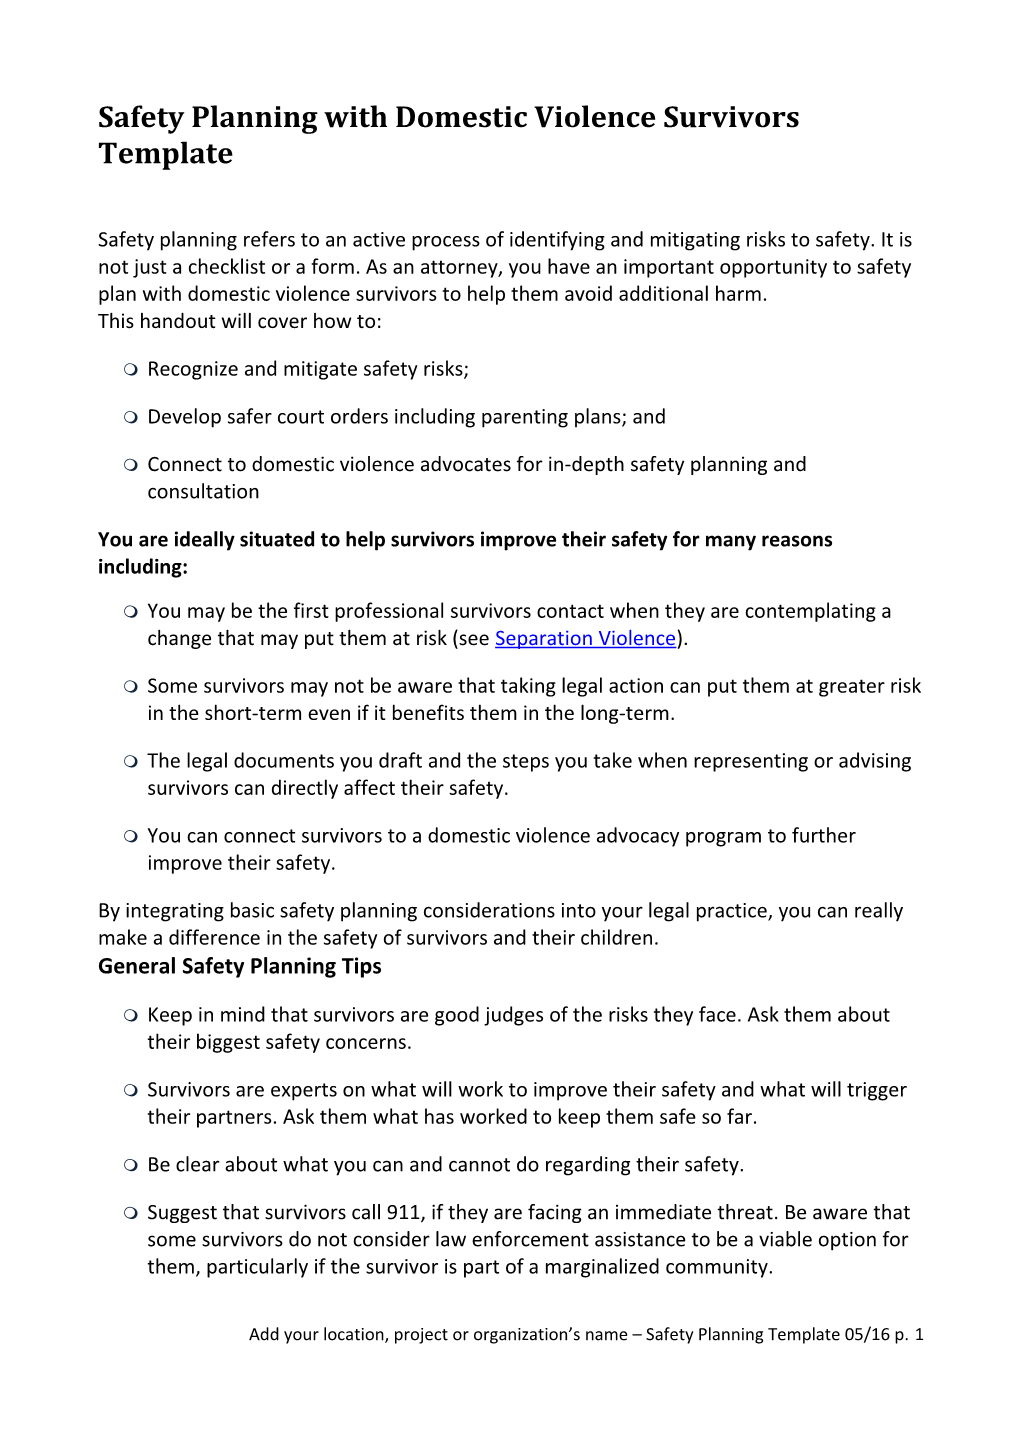 Safety Planning with Domestic Violence Survivors Template